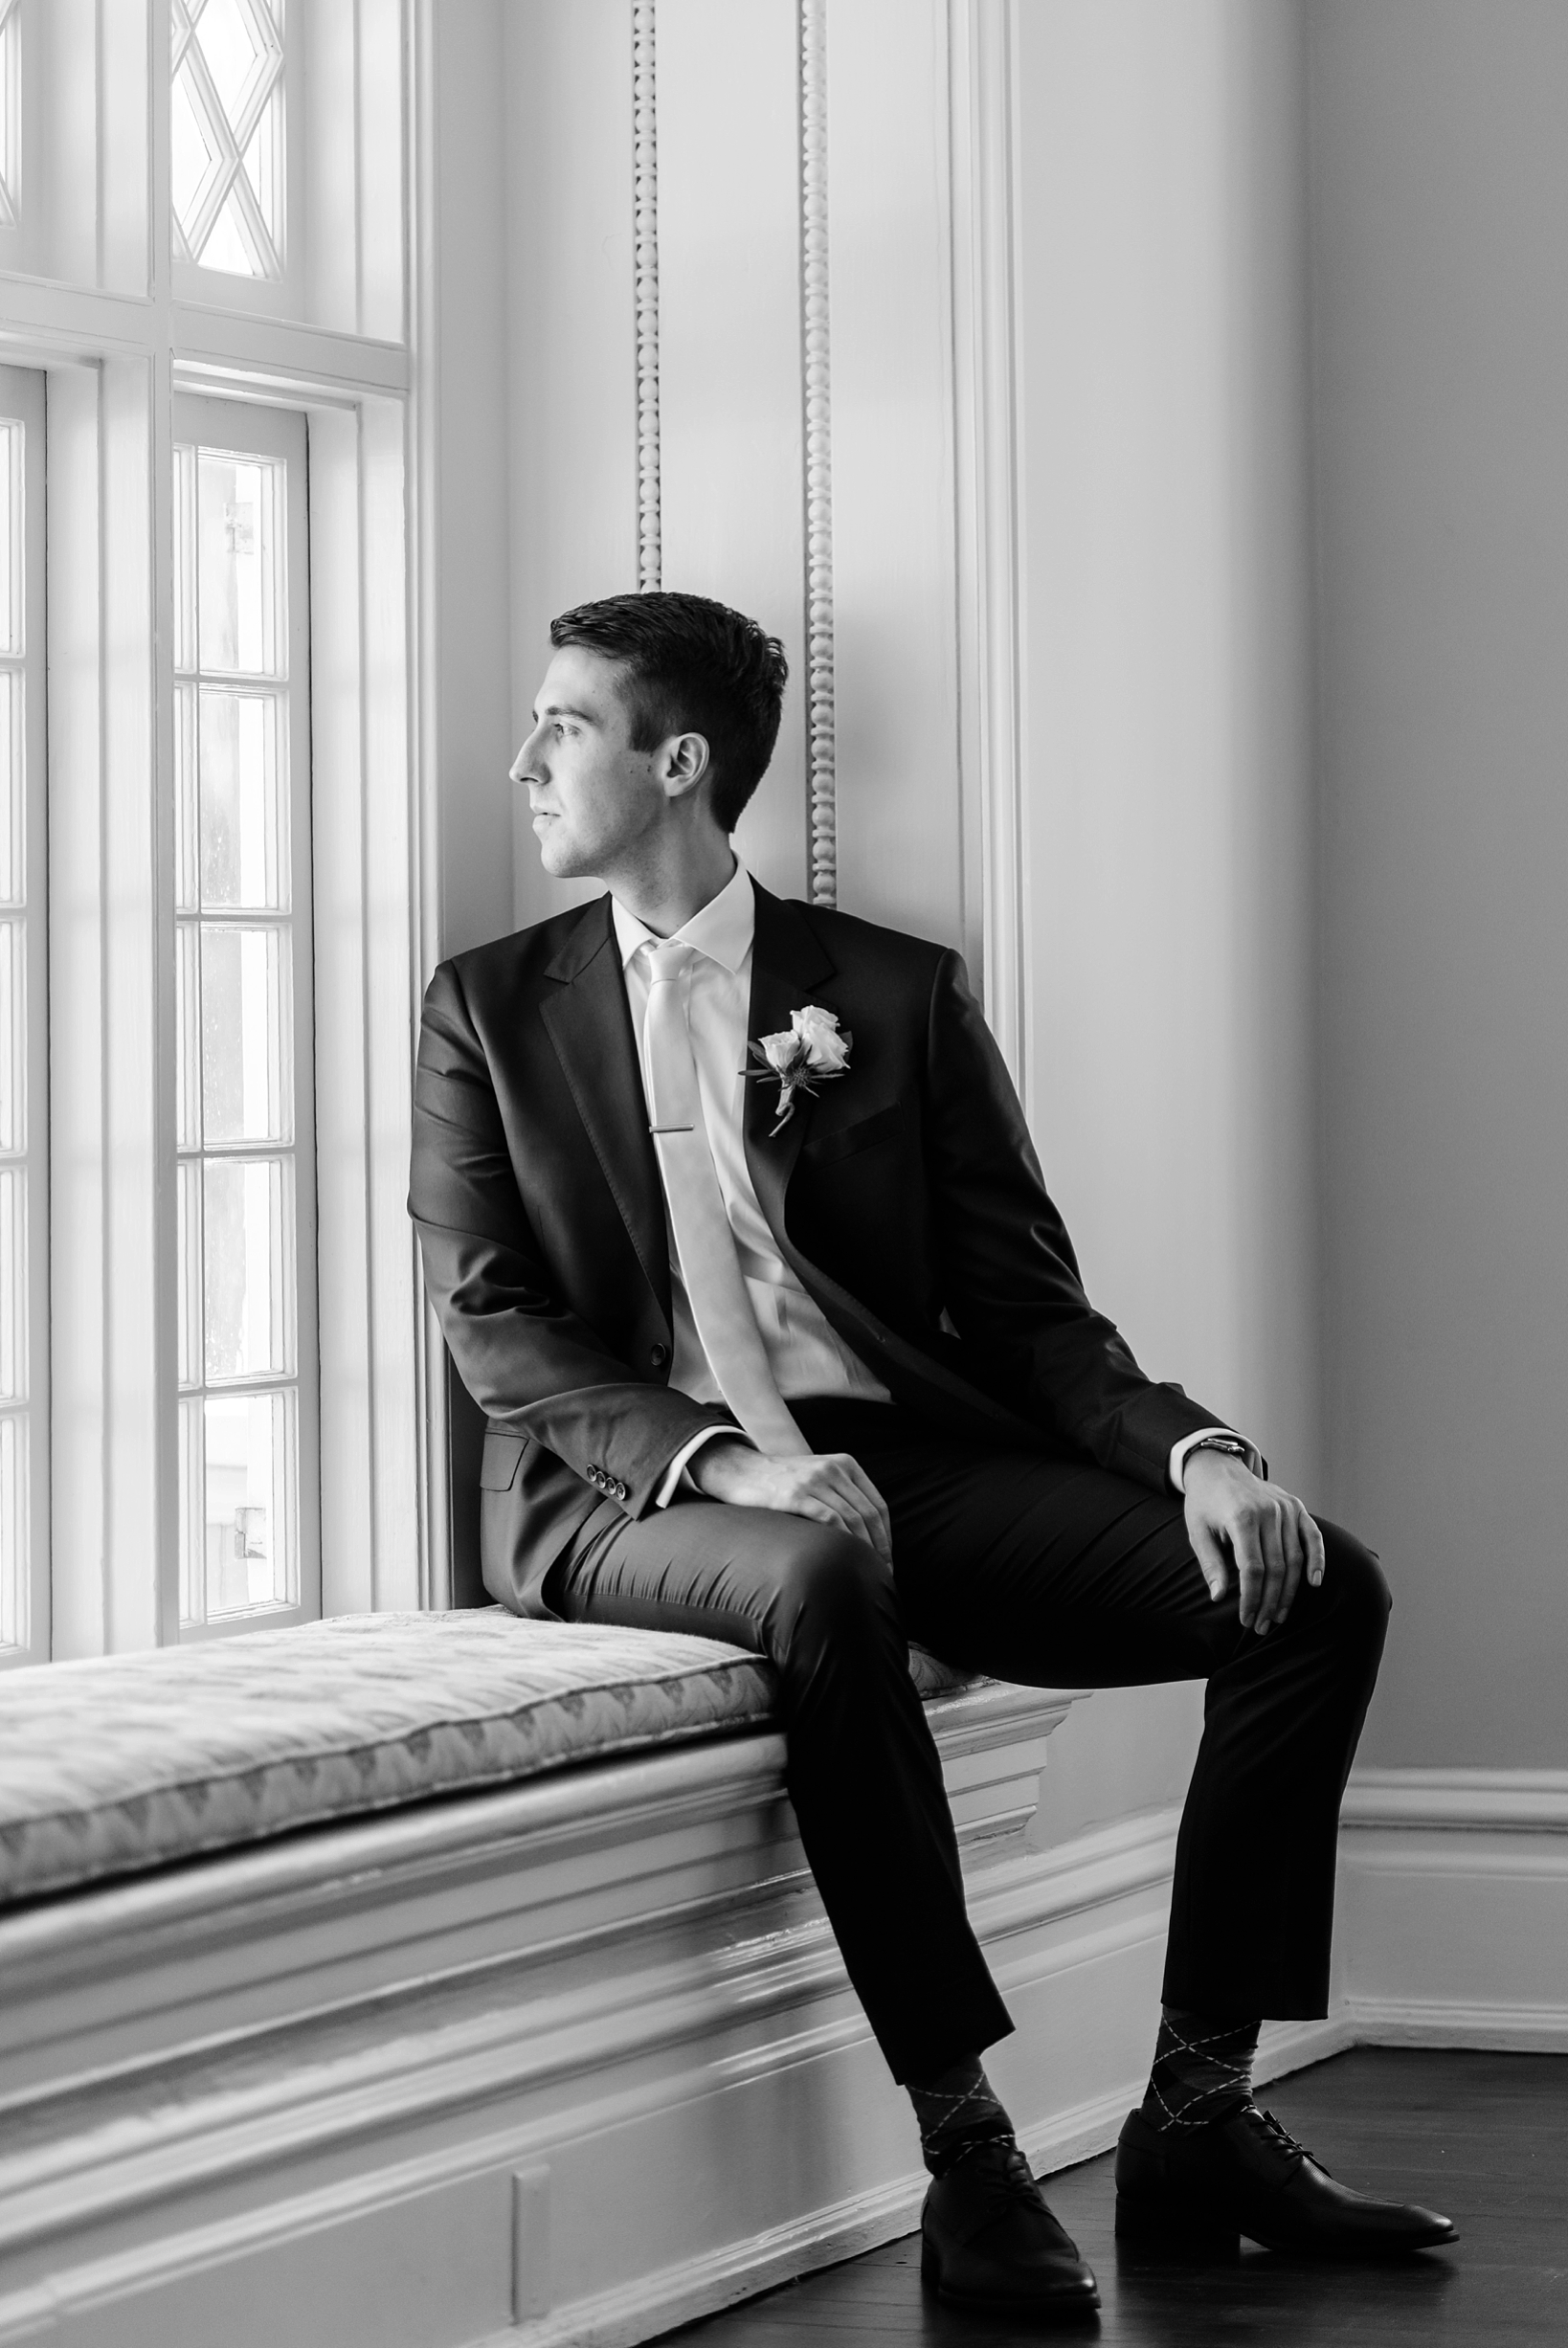 Groom looking out the window in classic black and white by www.sarahben.com